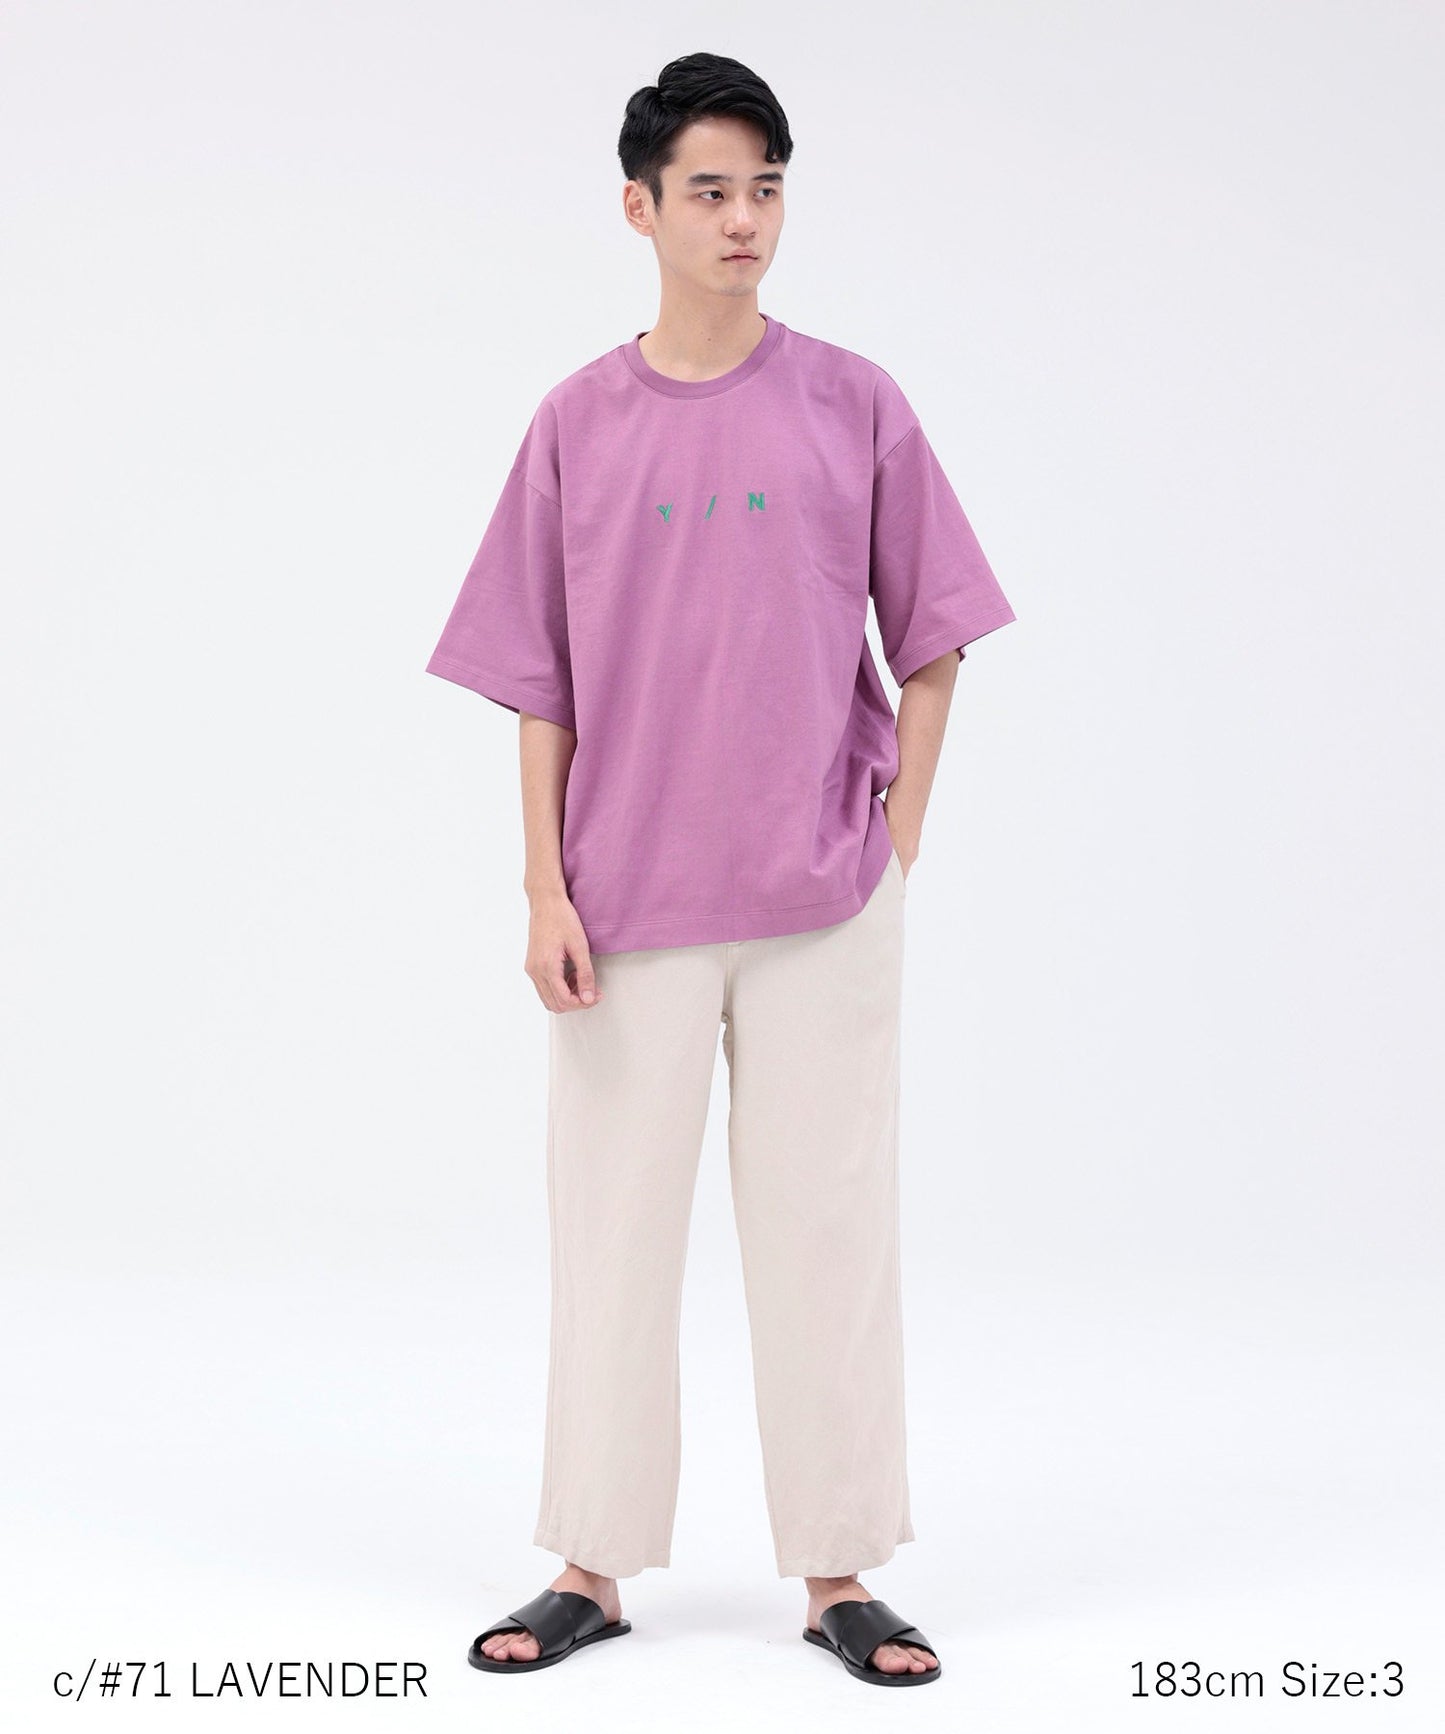 [Eco-friendly material] OG COTTON Y/N TEE Organic cotton wide type [145-175cm]